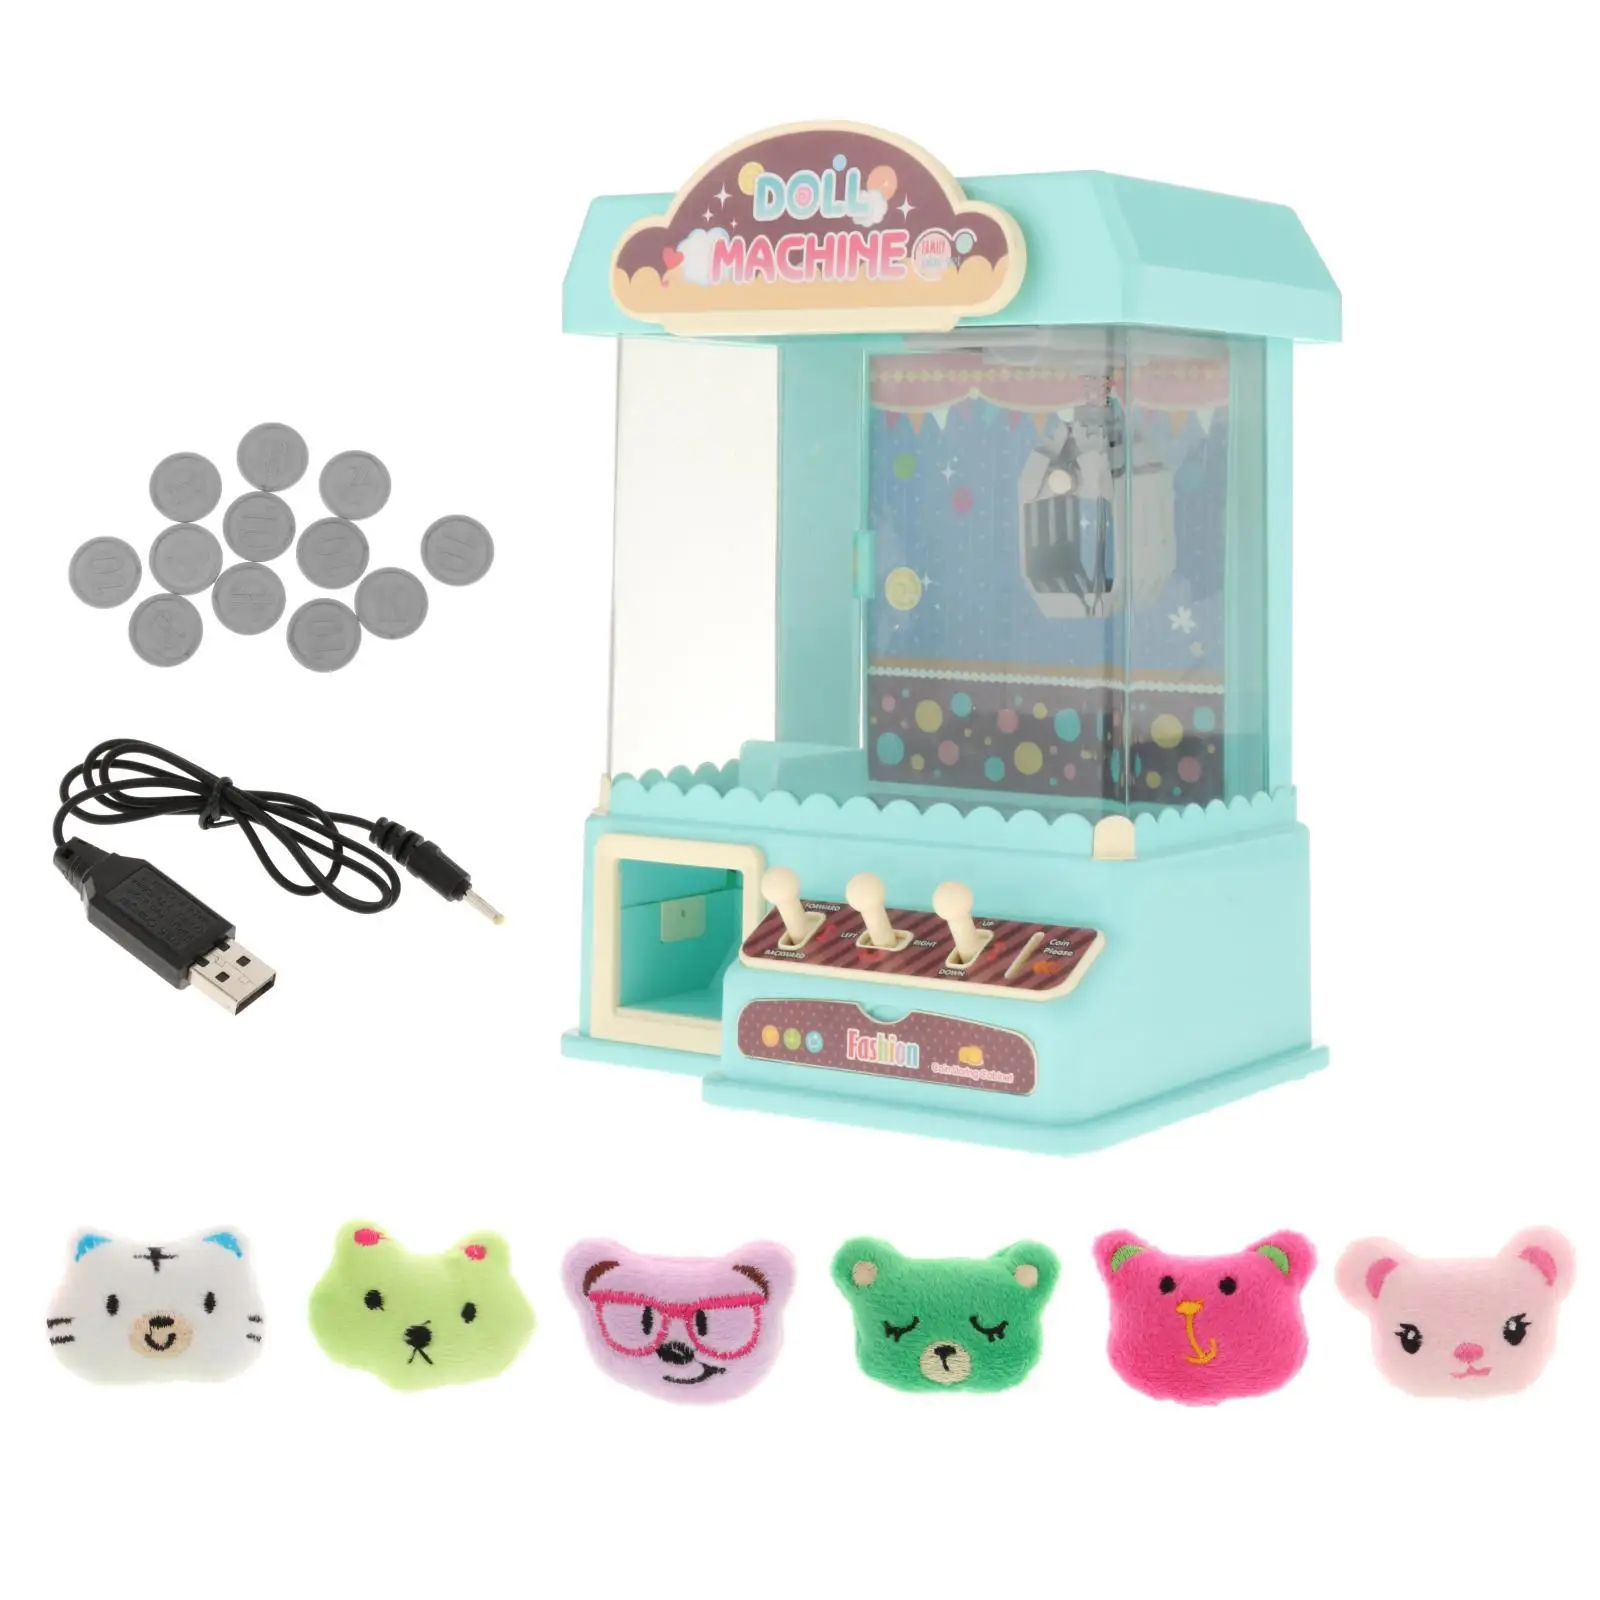 Rechargeable Manual Claw Machine Toy with Lights & Sounds Girl Grab Doll Clip Vending Grabber Machine for Children Kids